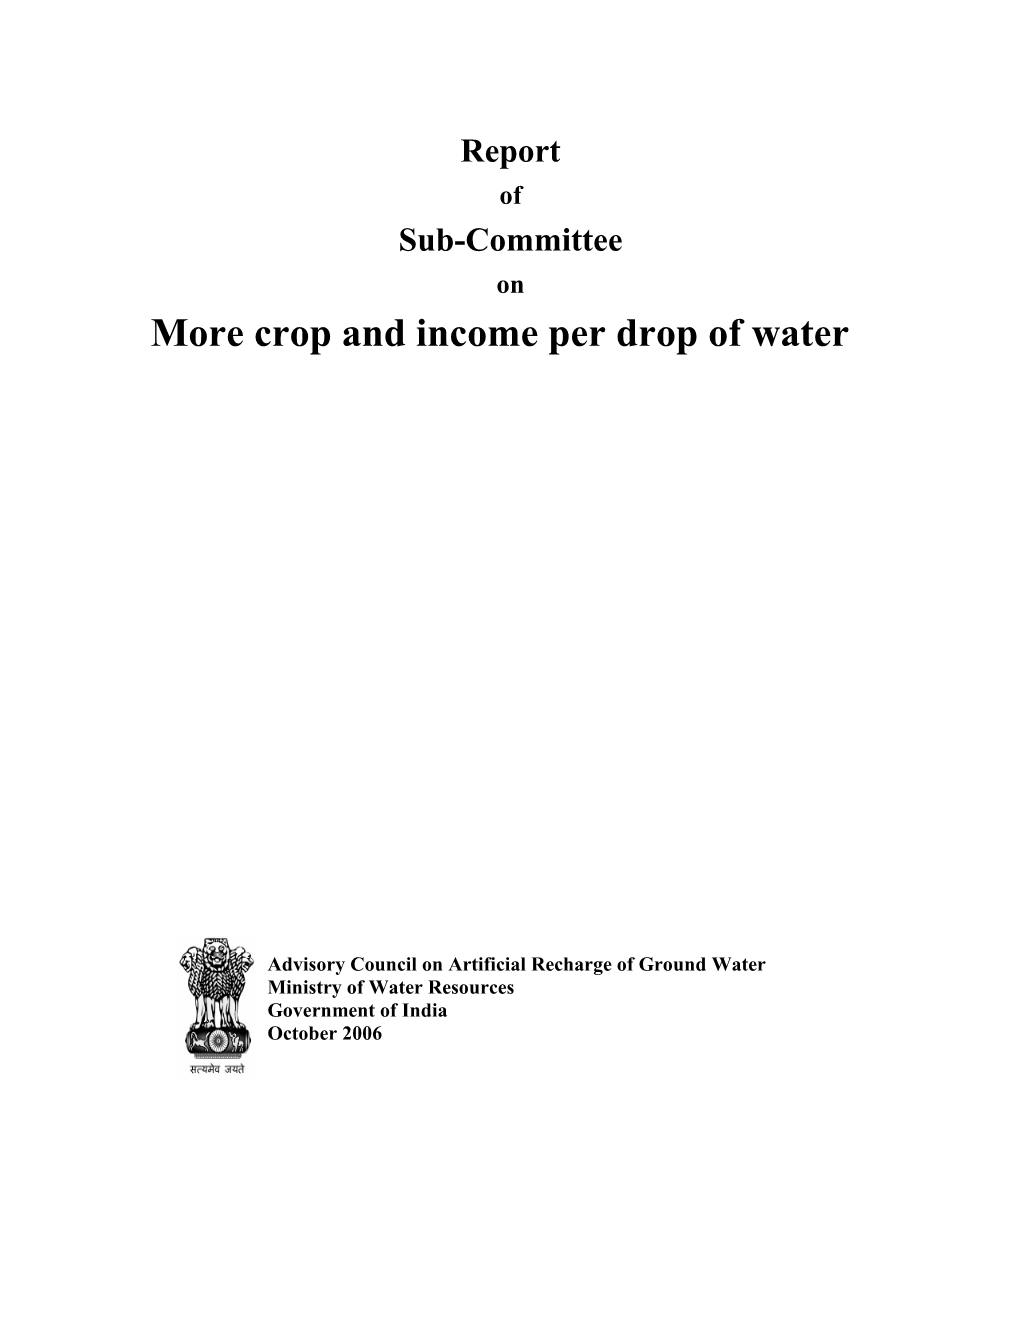 More Crop and Income Per Drop of Water